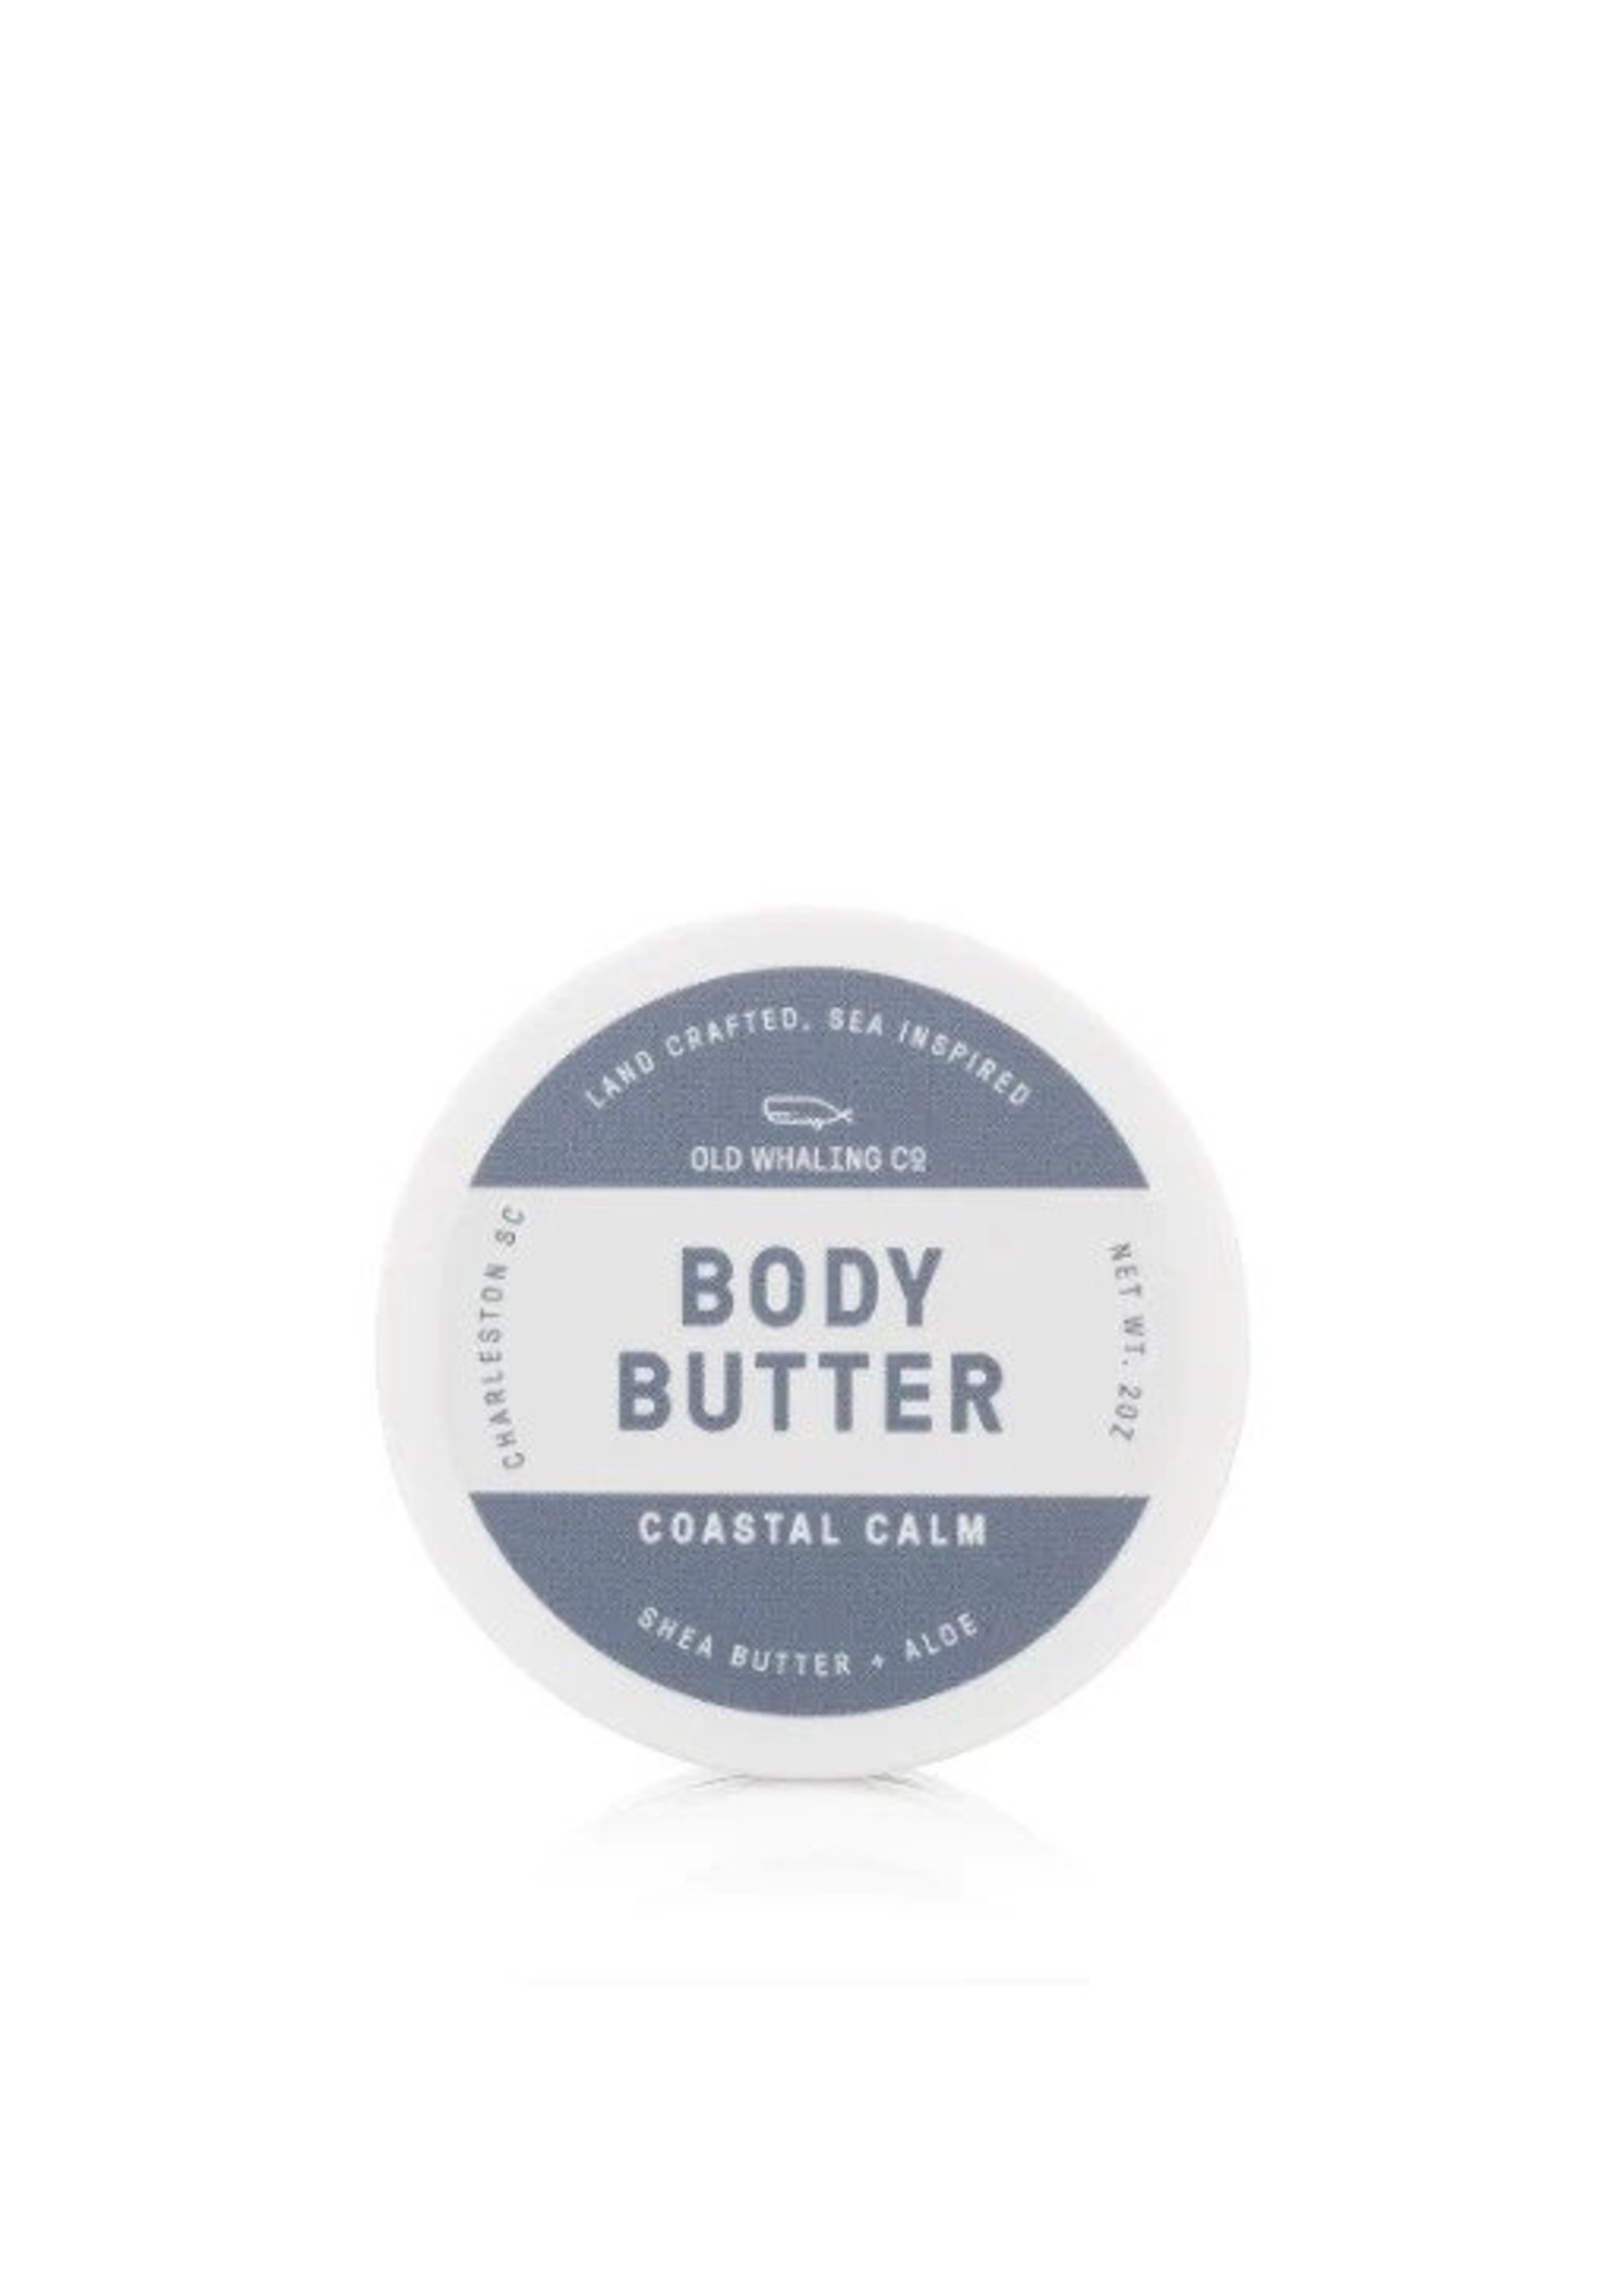 Old Whaling Co. Body Butter Travel Size | 2oz